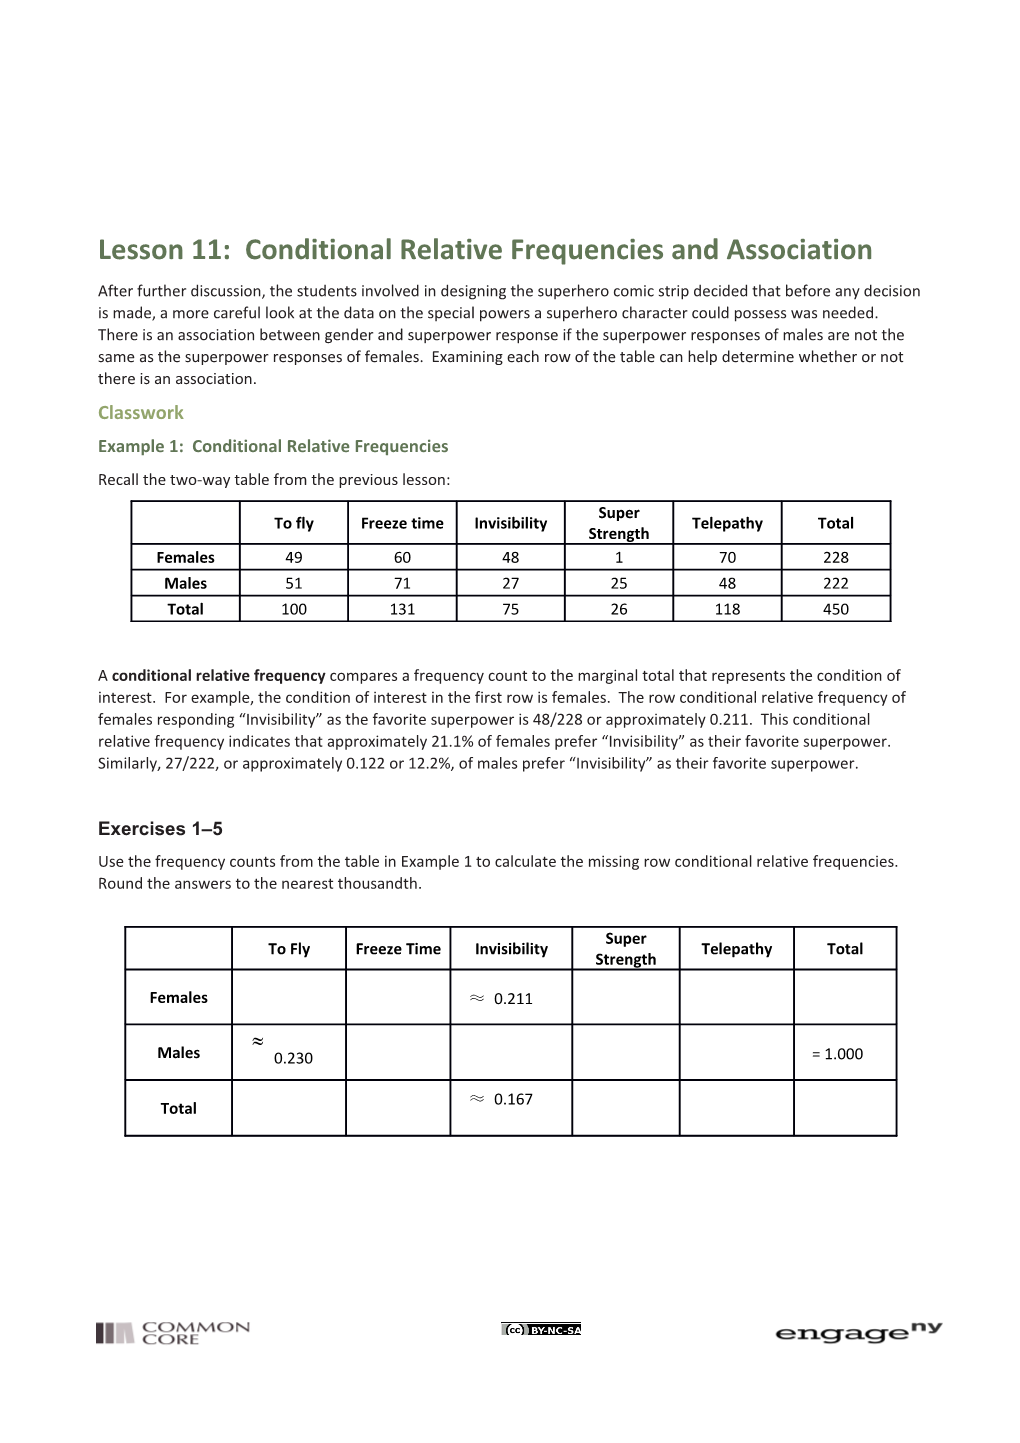 Lesson 11: Conditional Relative Frequencies and Association